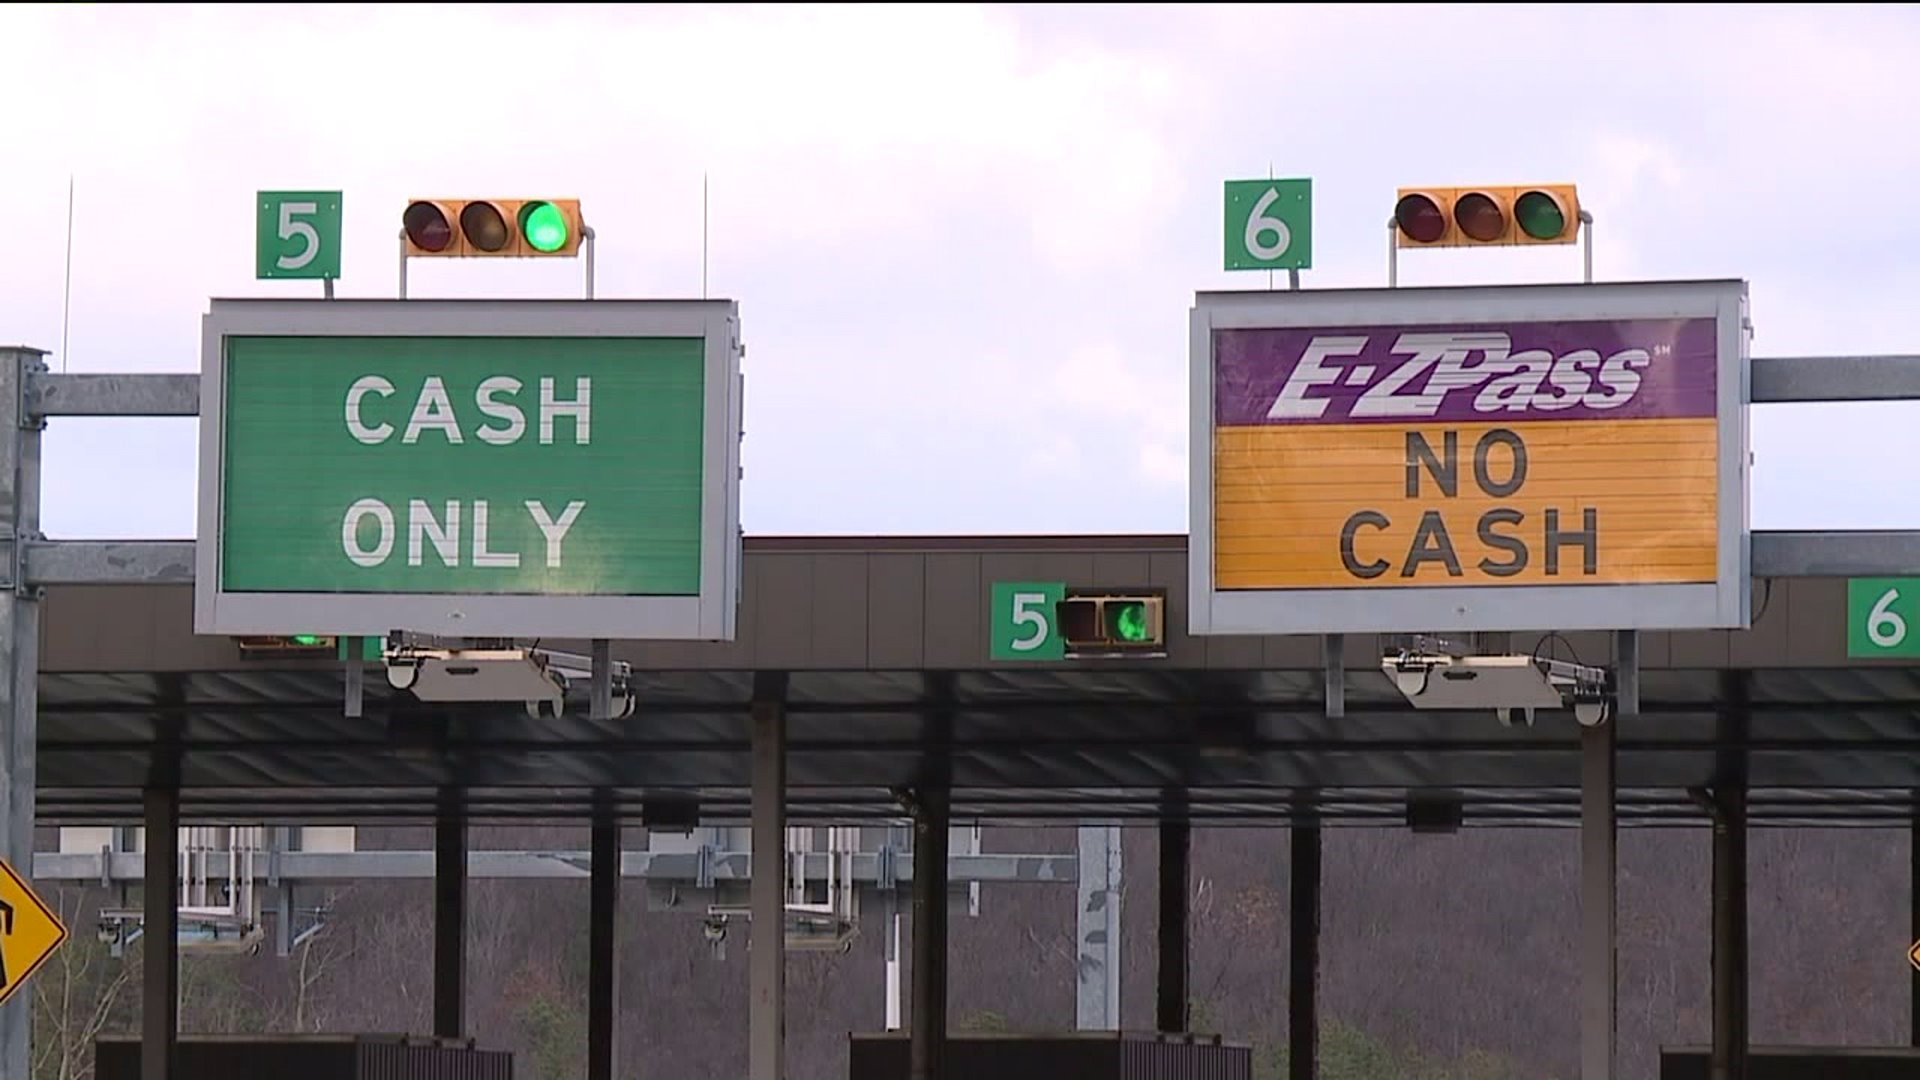 Turnpike officials stop the exchange of cash at tolls during the pandemic.